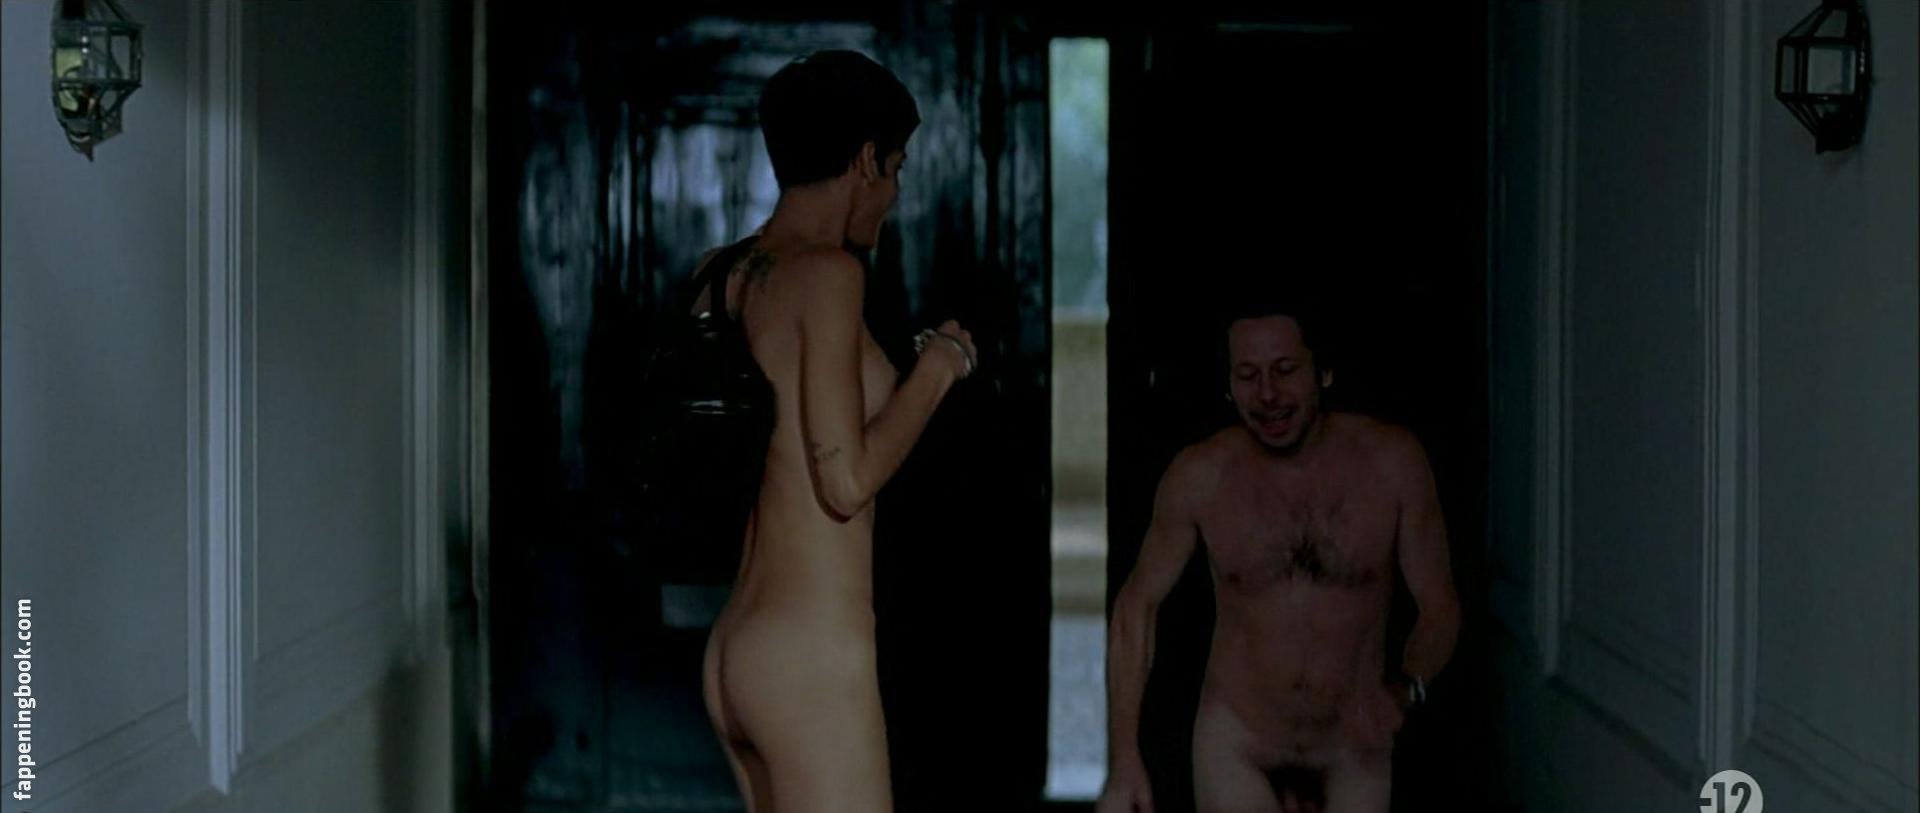 Nude Roles in Movies: Happy End (2009). 